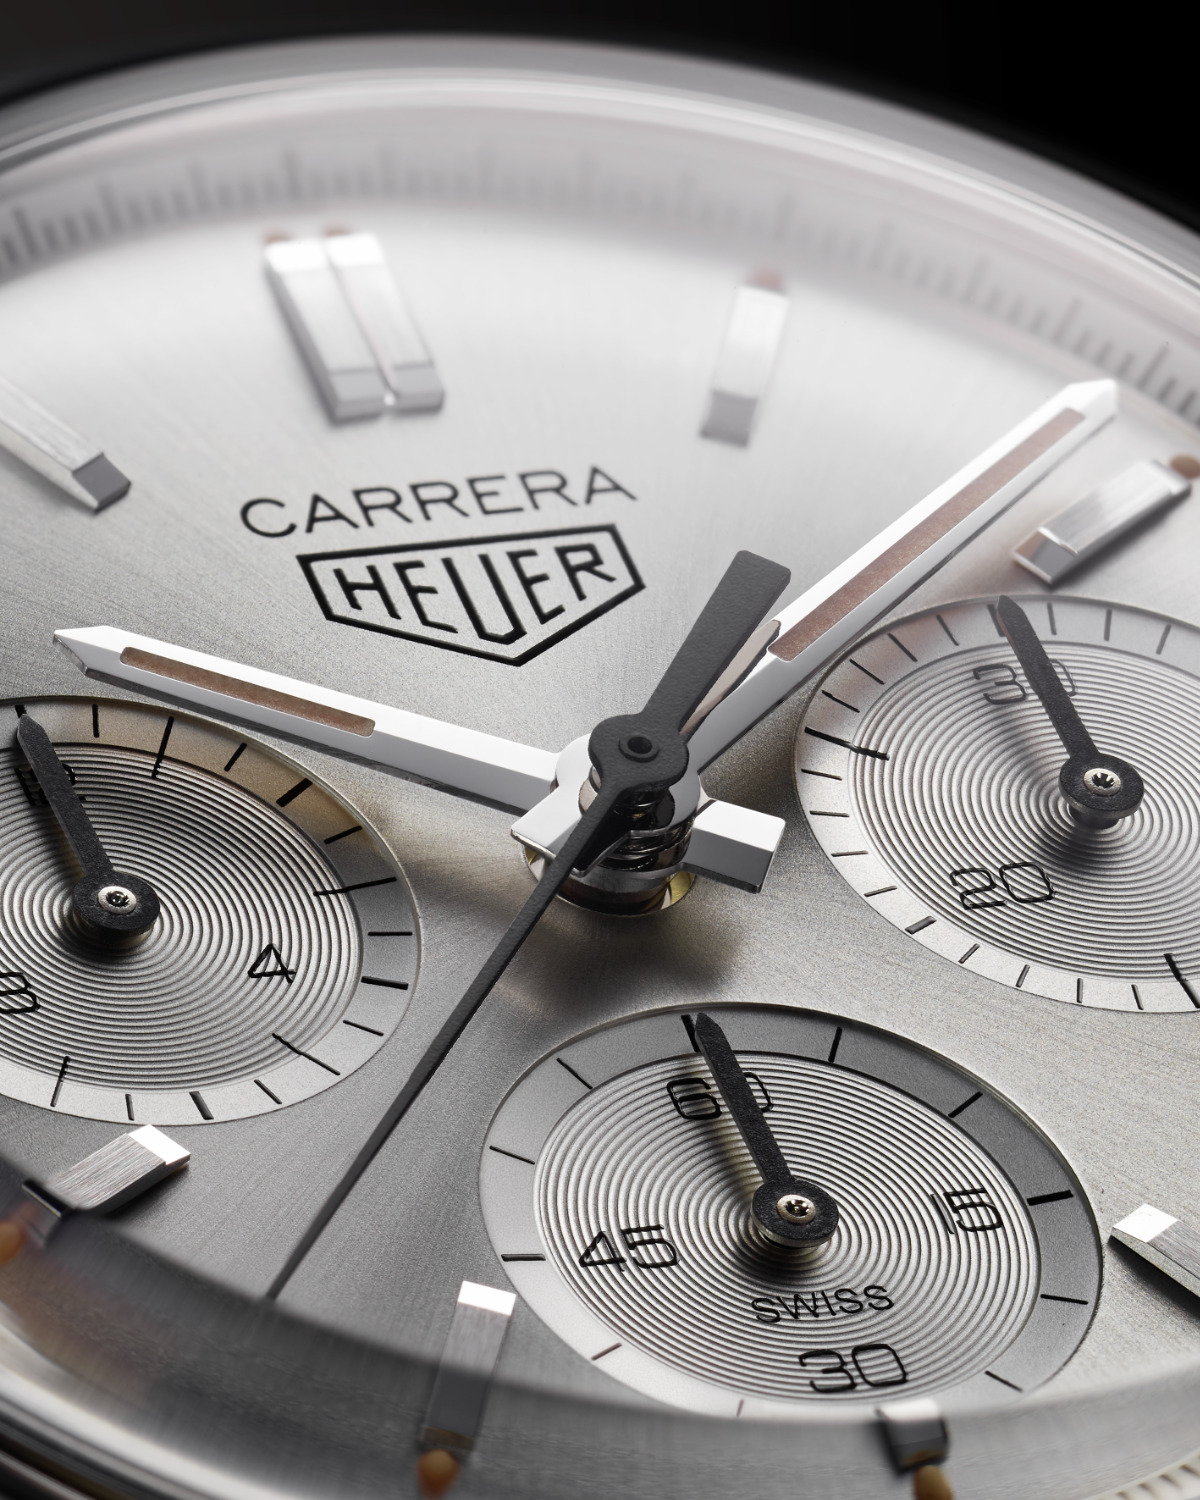 160 years young: Tag Heuer kicks off a milestone anniversary with the re-edition of a Heuer Carrera